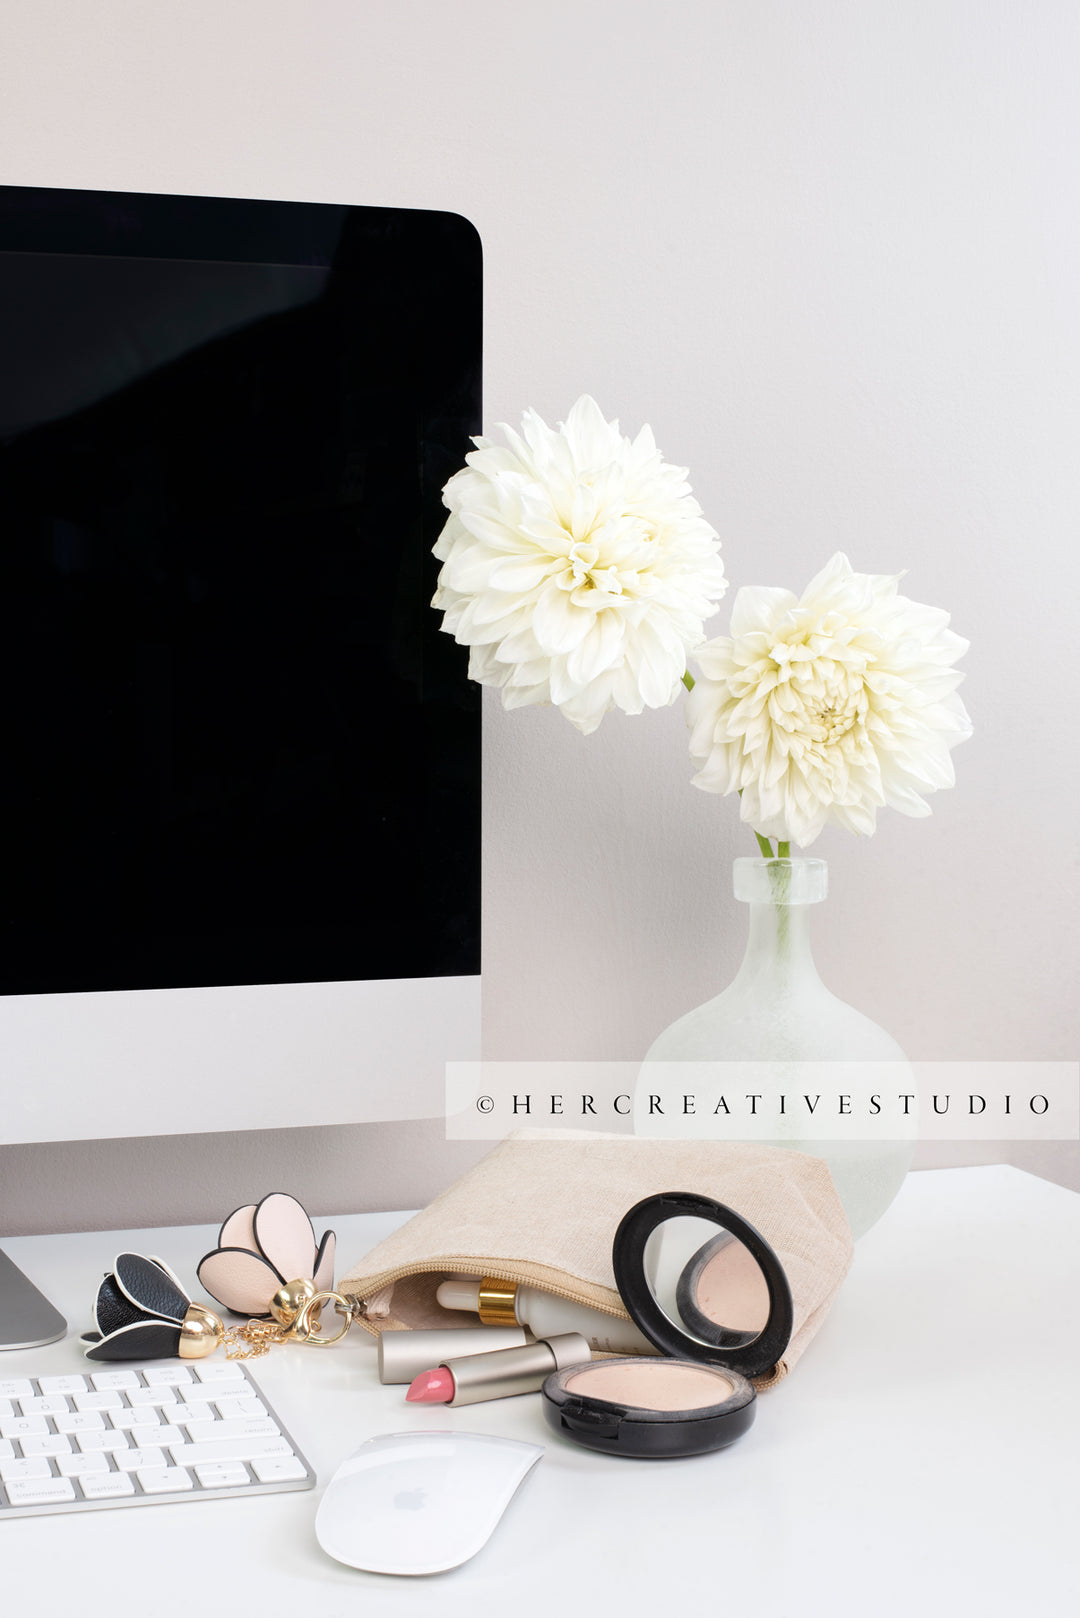 Dahlia & Makeup on Computer Desk, Styled Stock